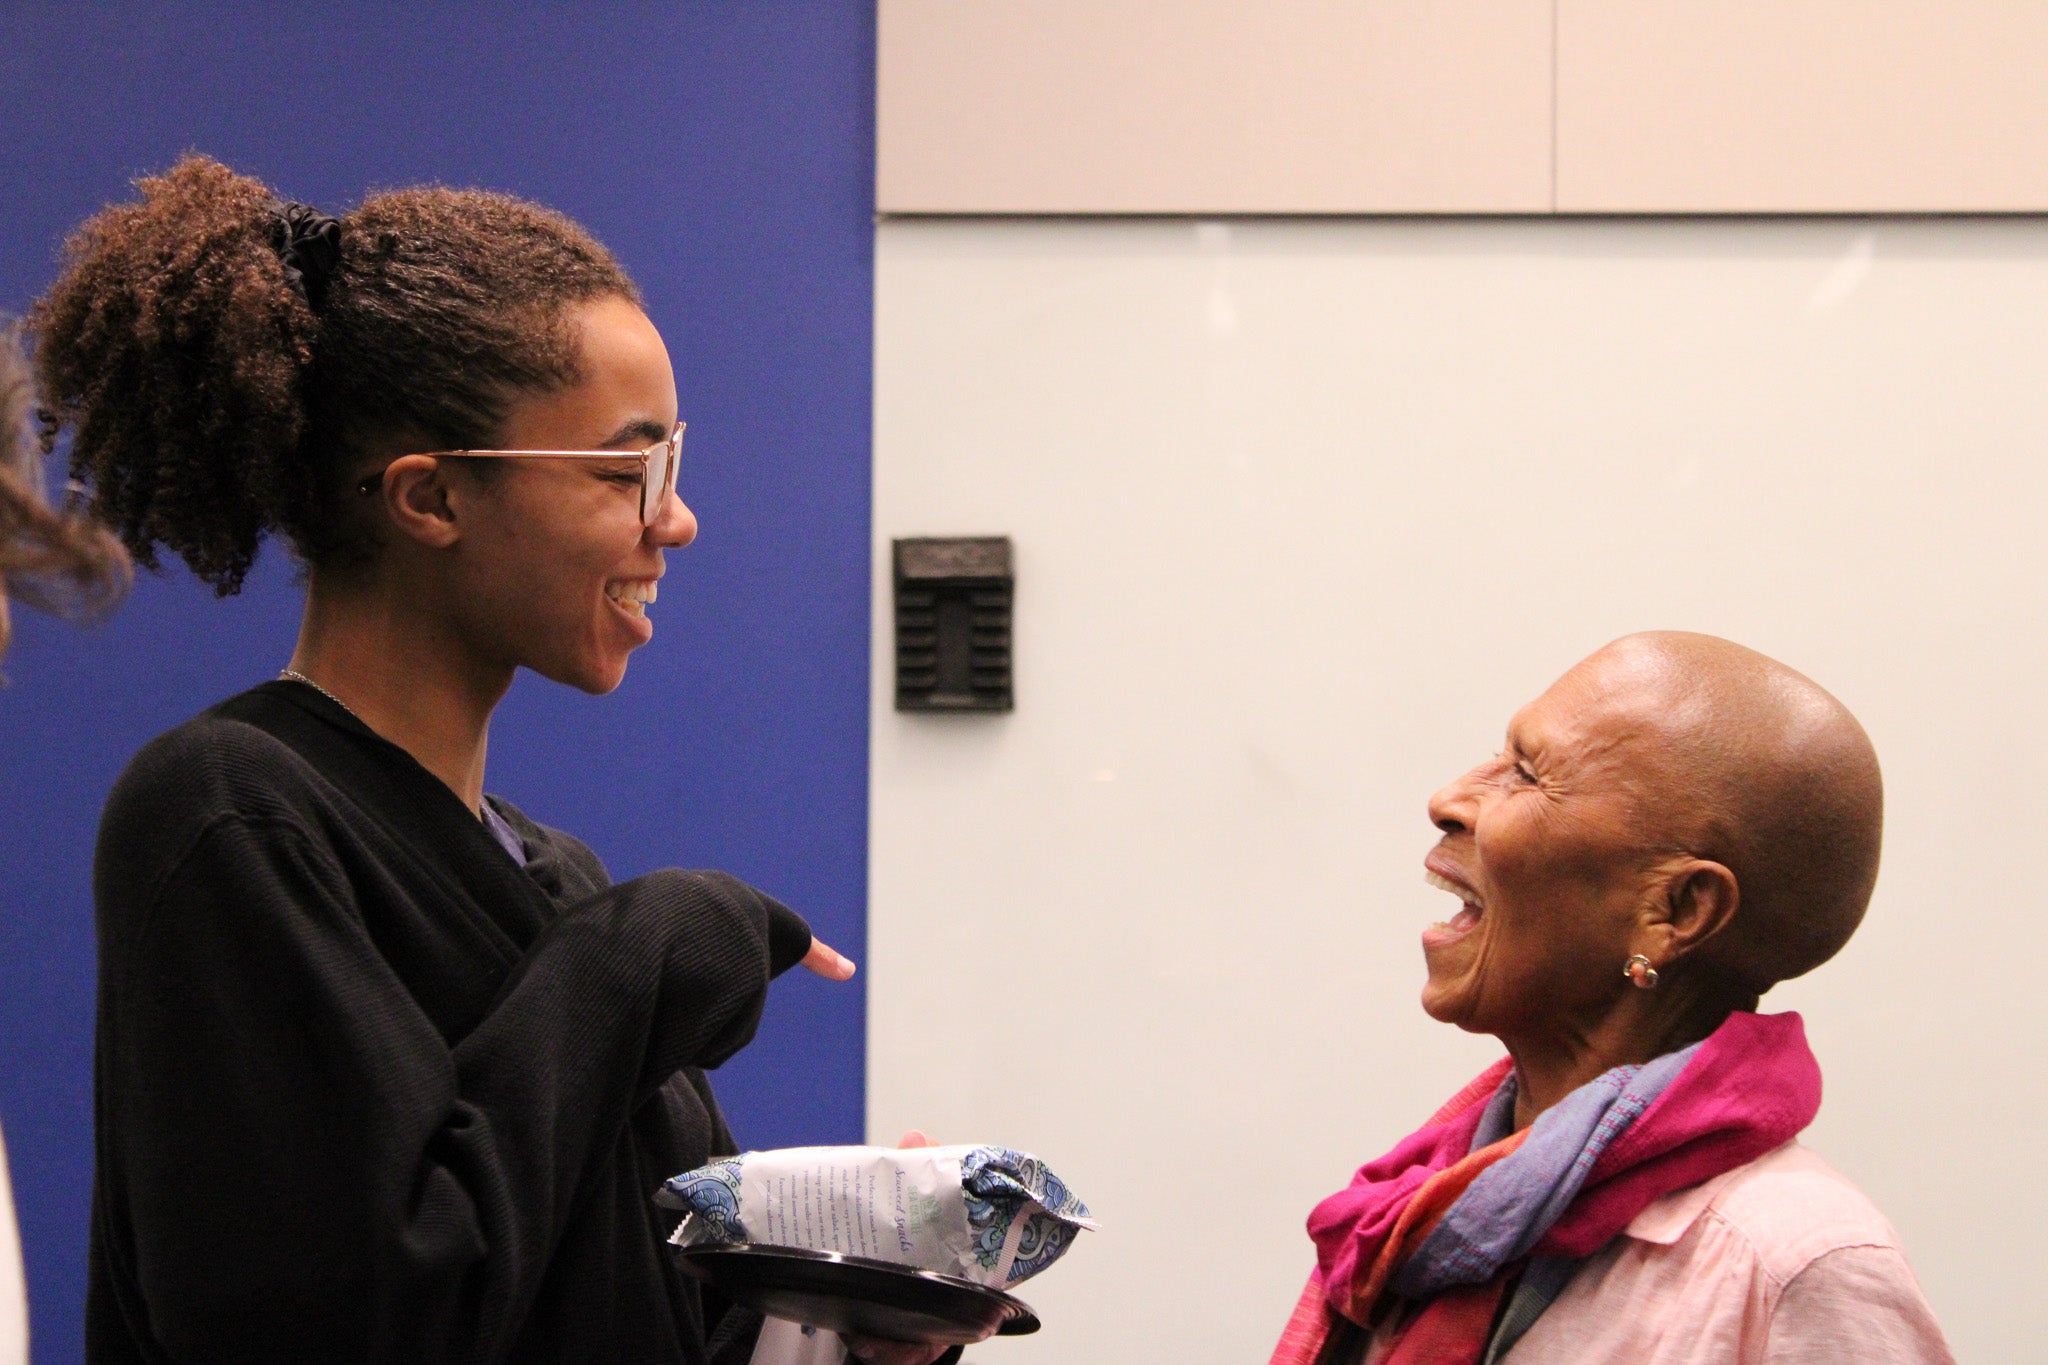 Dr. McFadden is talking with a black woman student after the lecture.